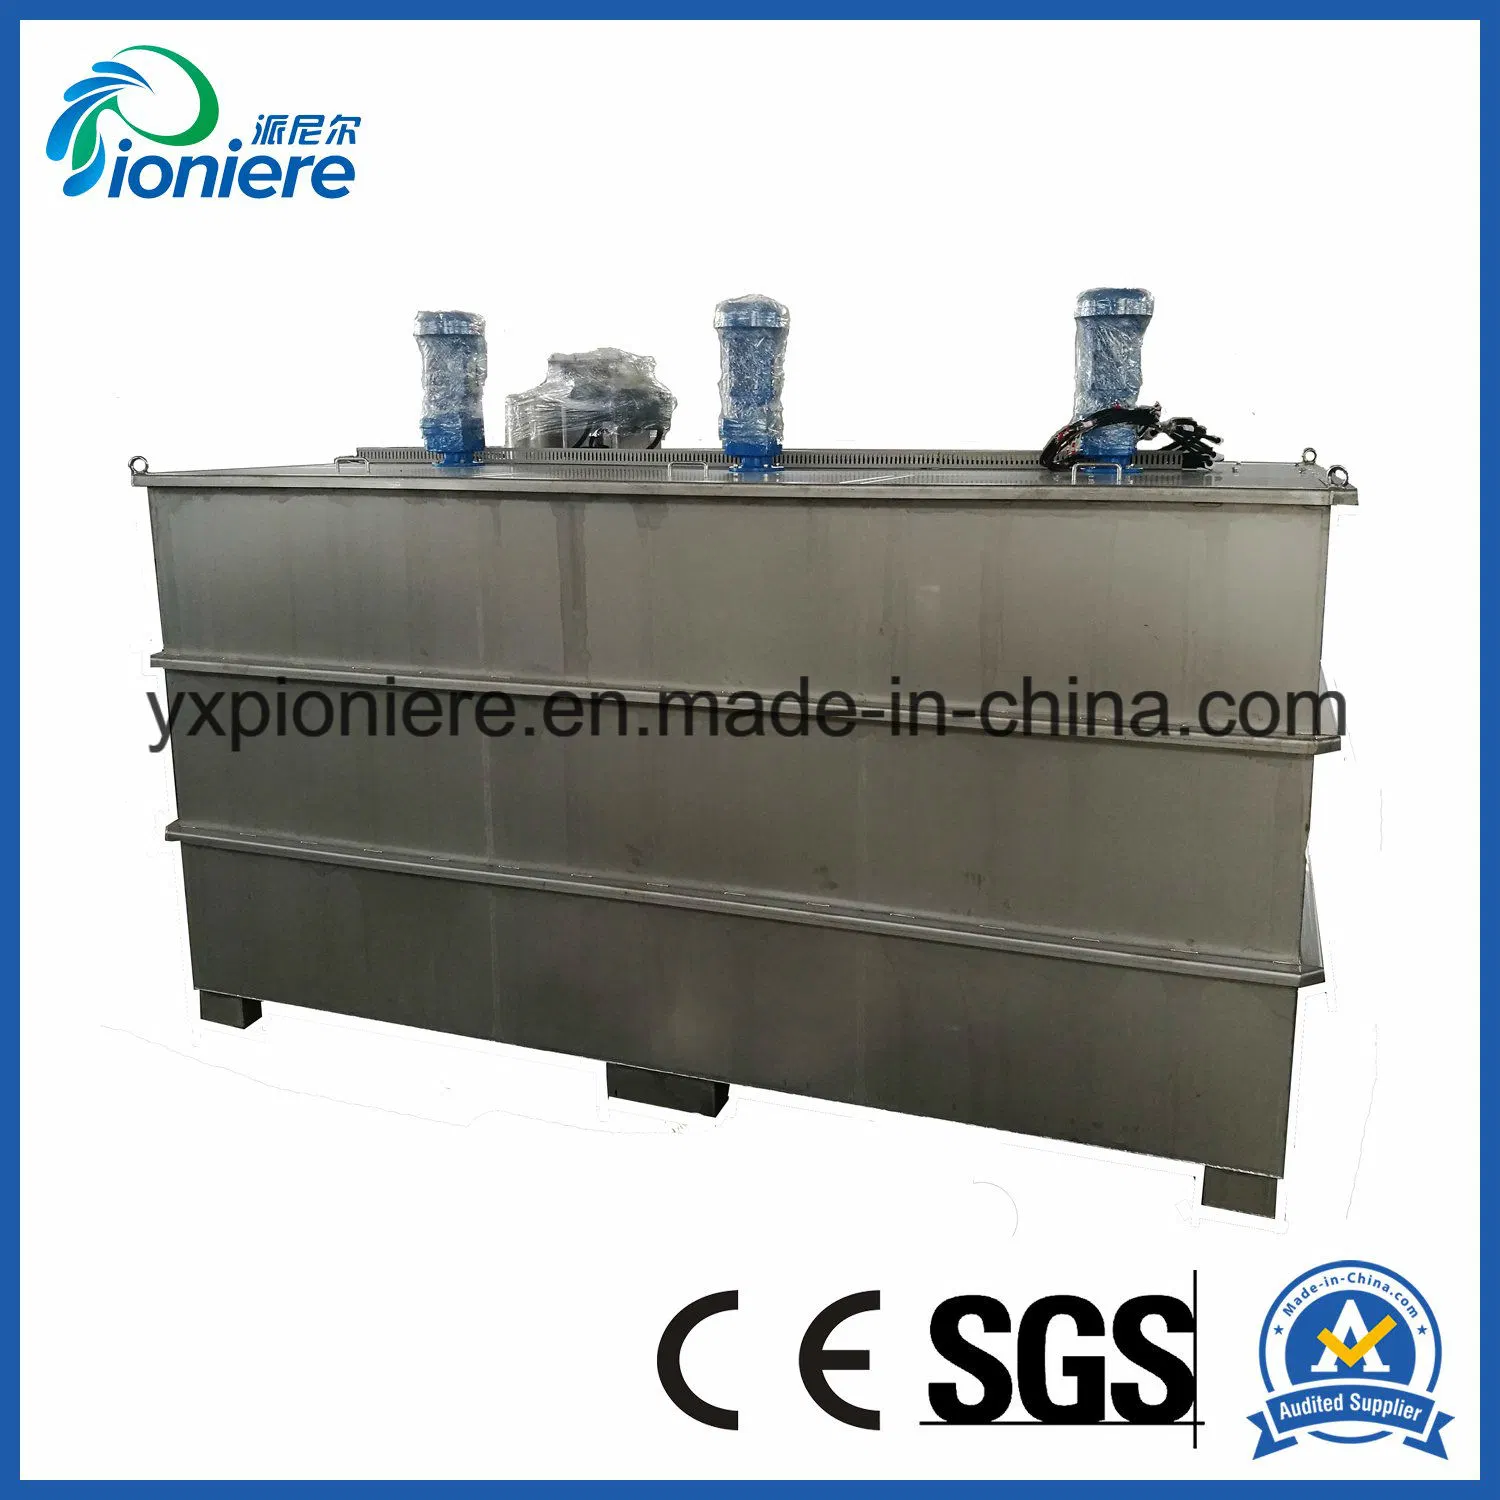 Large Volume Automatic Polymer Dispensing Machine for Farm Waste Water Treatment